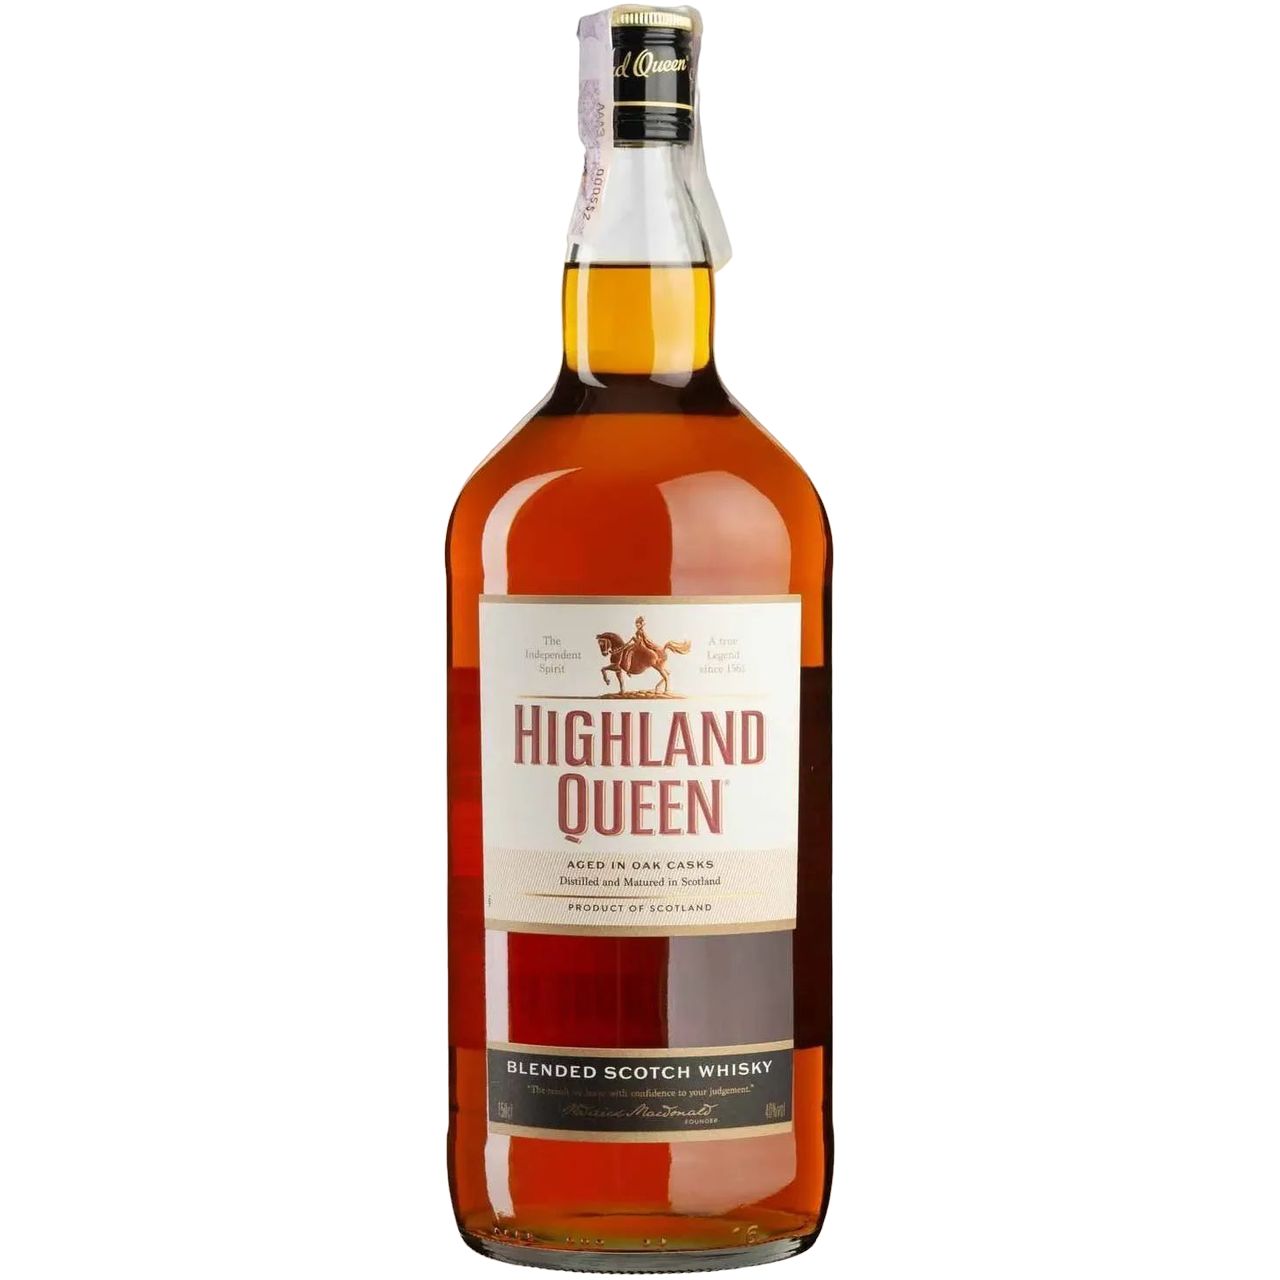 Виски Highland Queen Blended Scotch Whisky 40% 1.5 л - фото 1